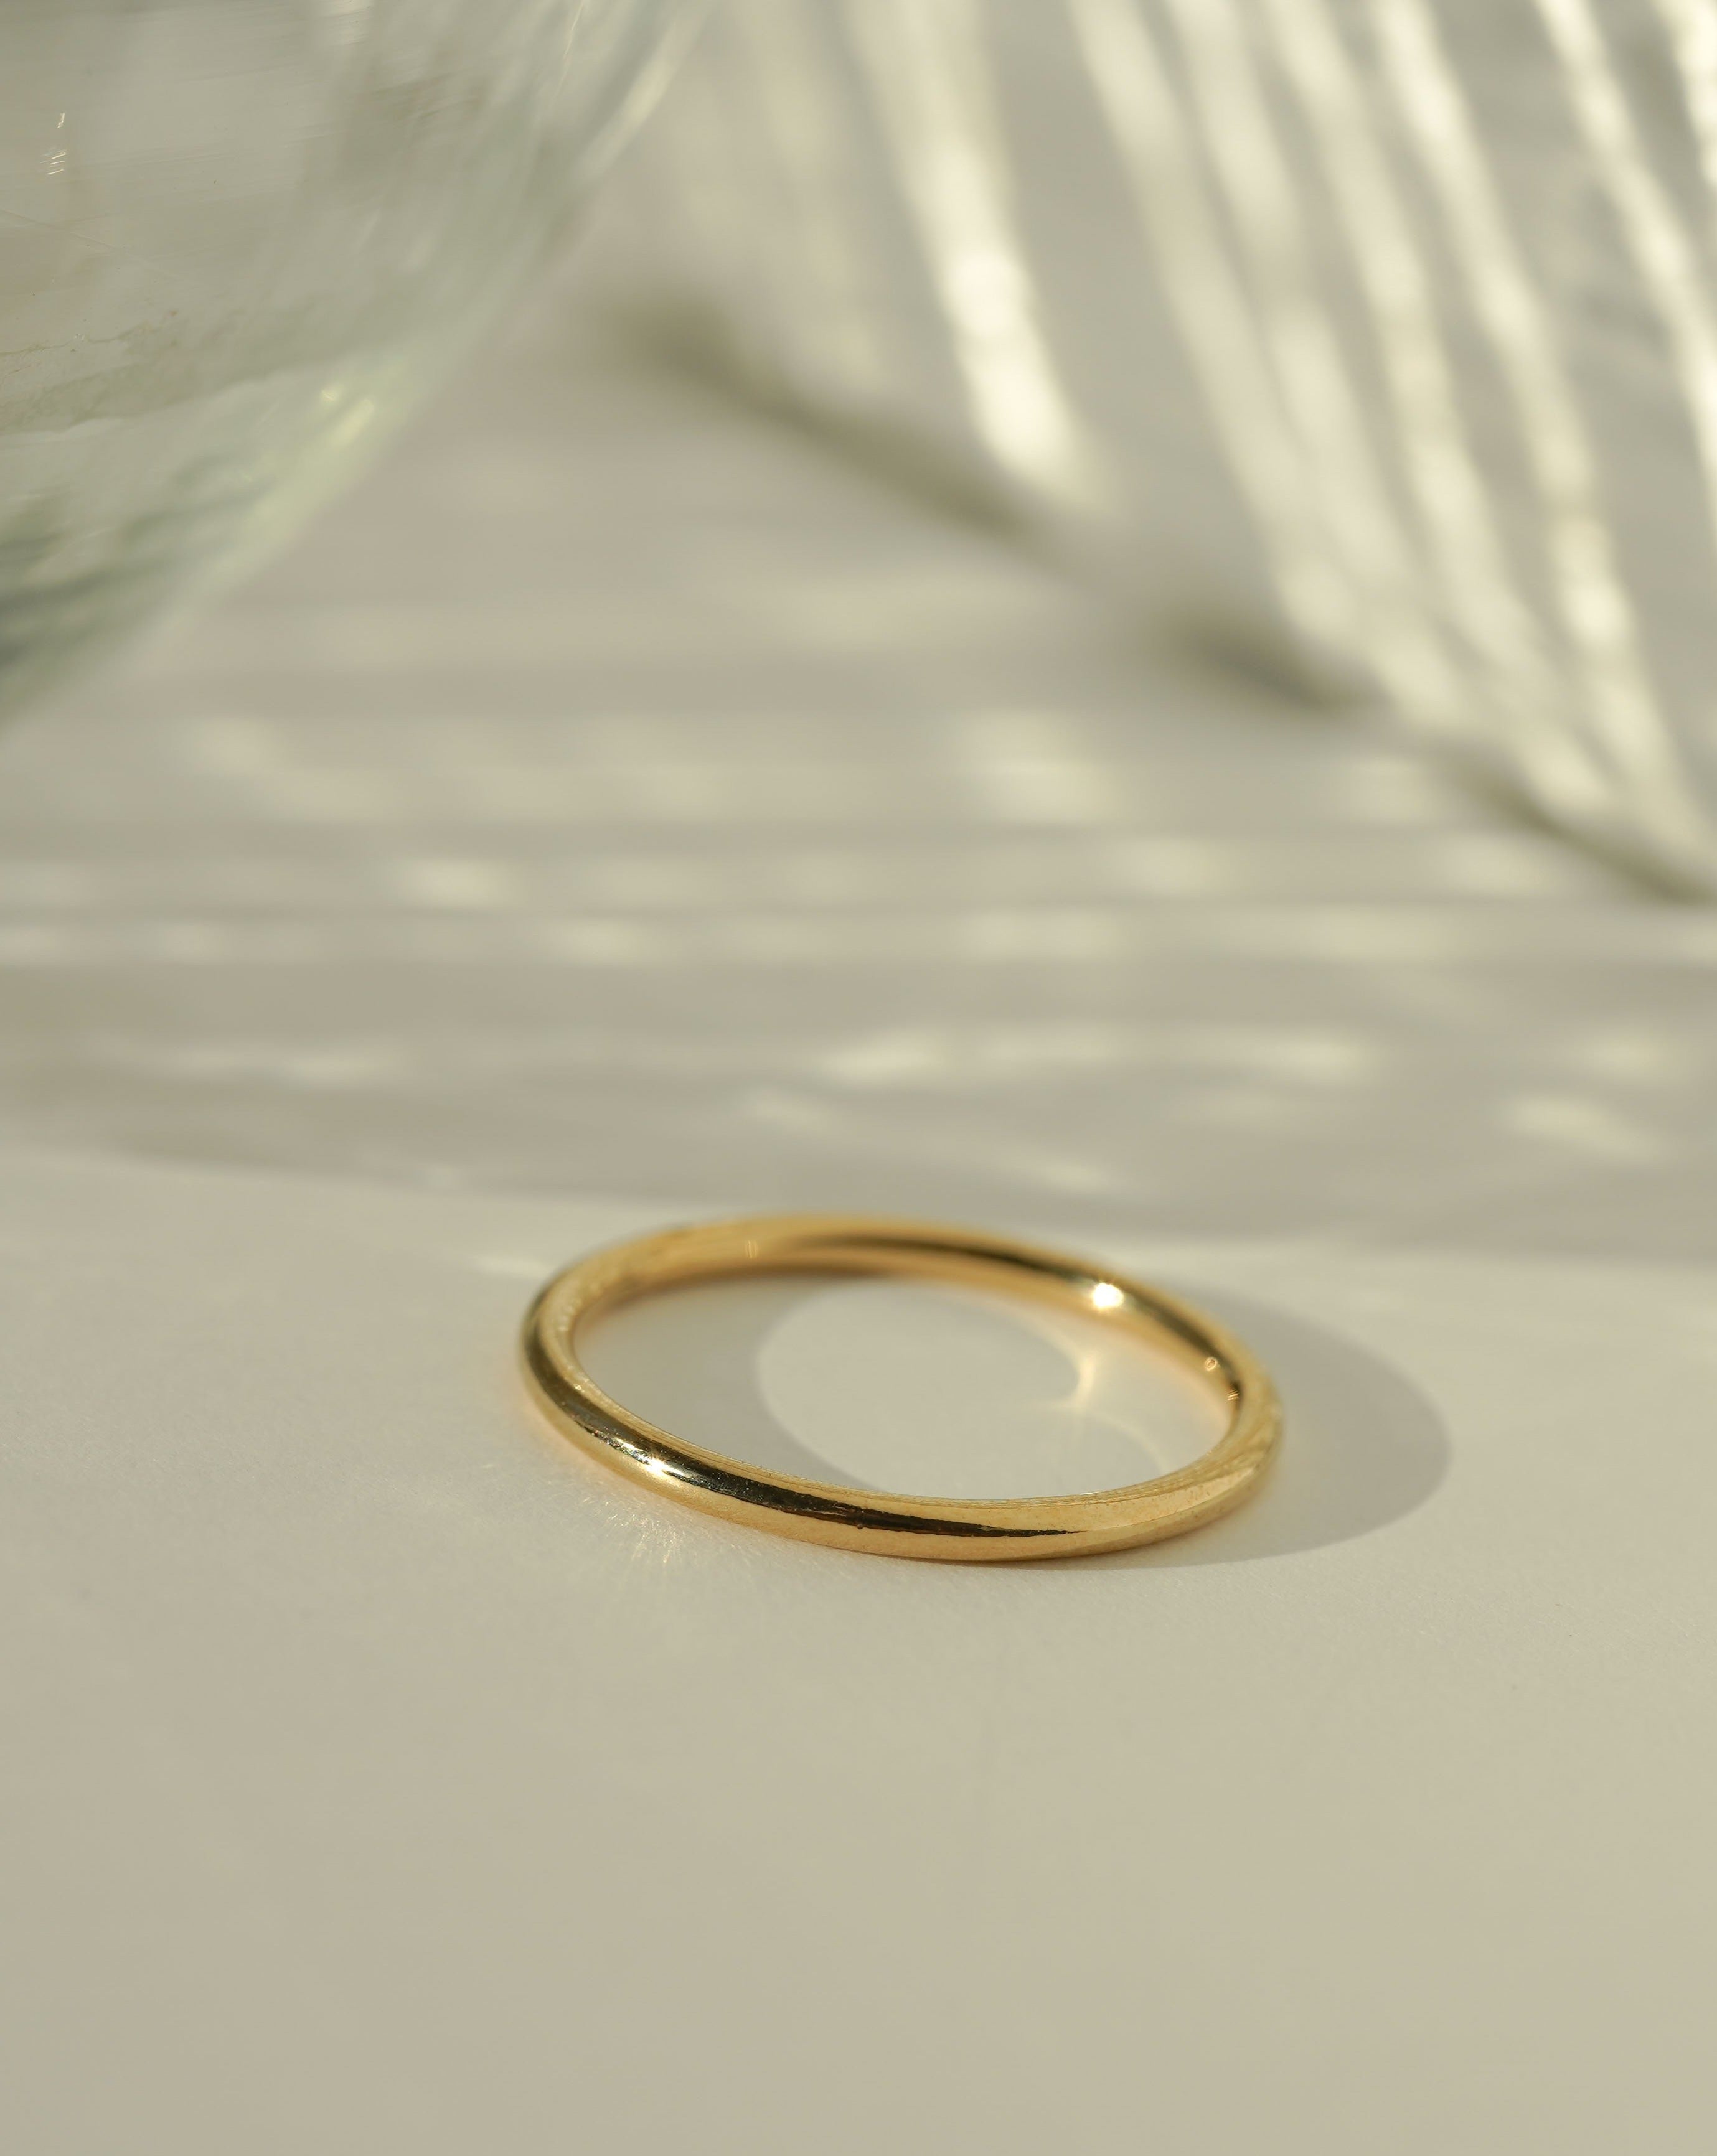 Berkley Ring by KOZAKH. A simple 2mm thick stackable ring crafted in 14K Gold Filled.